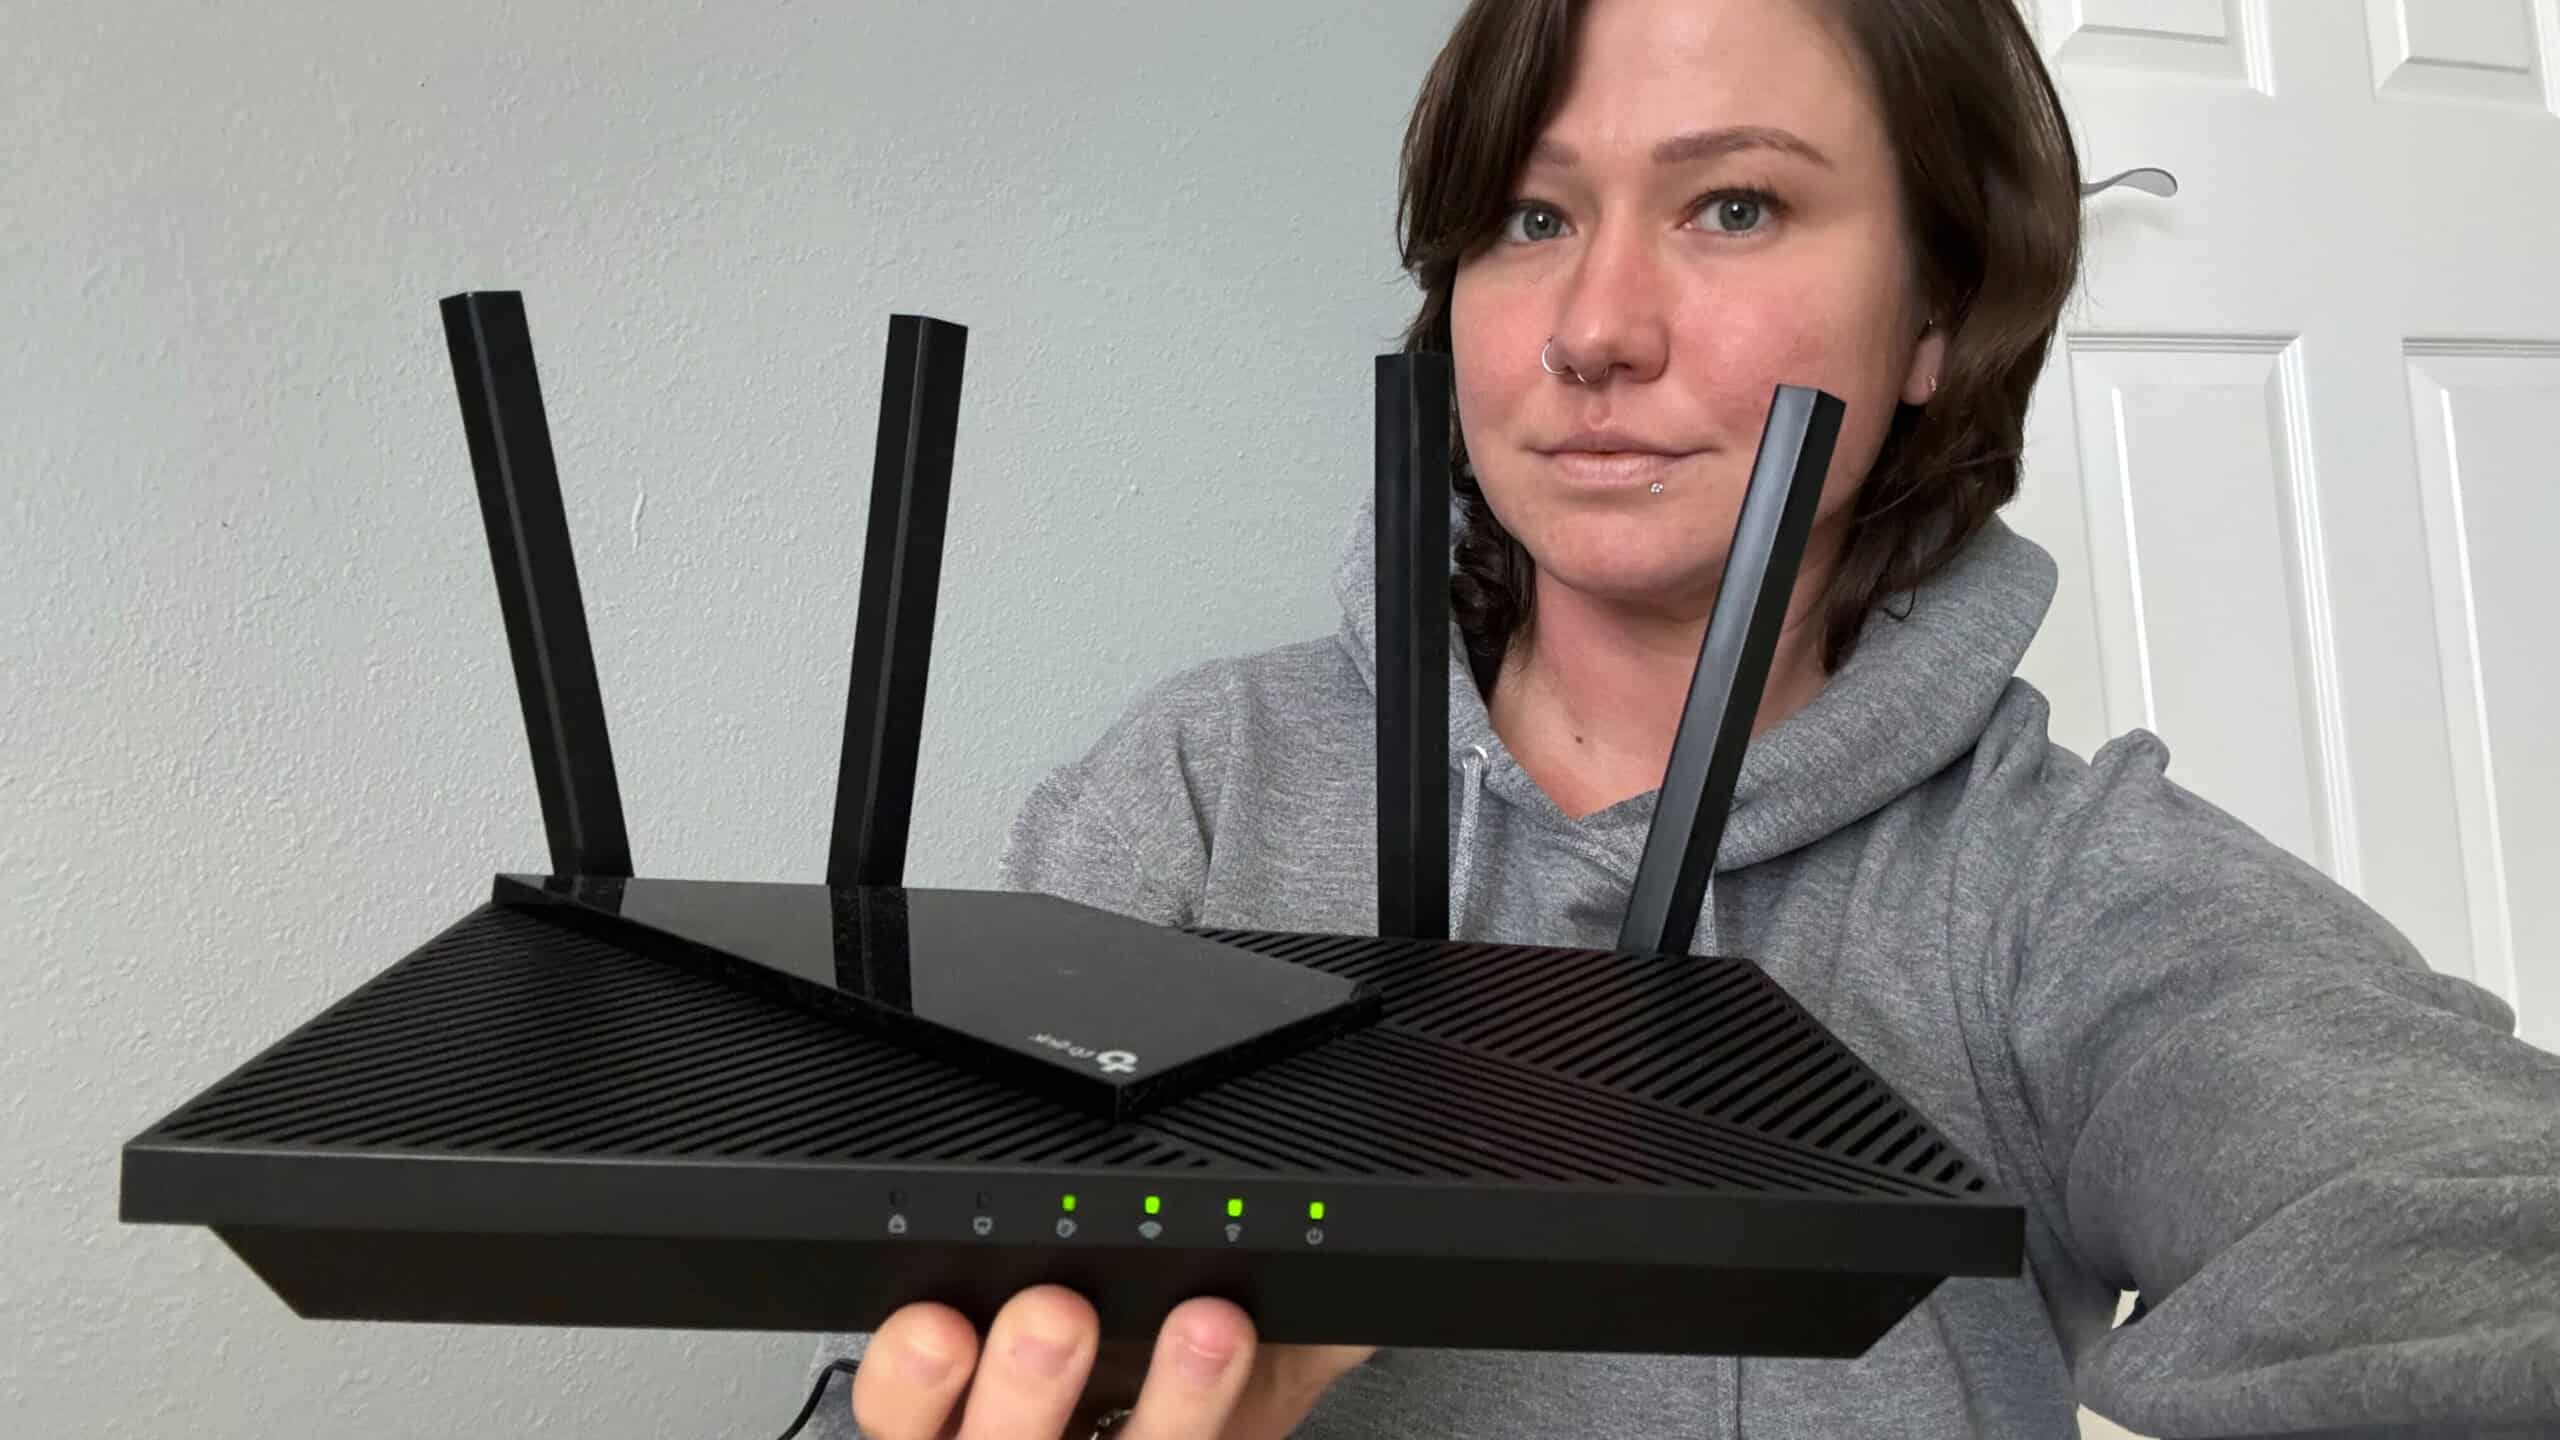 Bethany holding the TP-Link Archer router